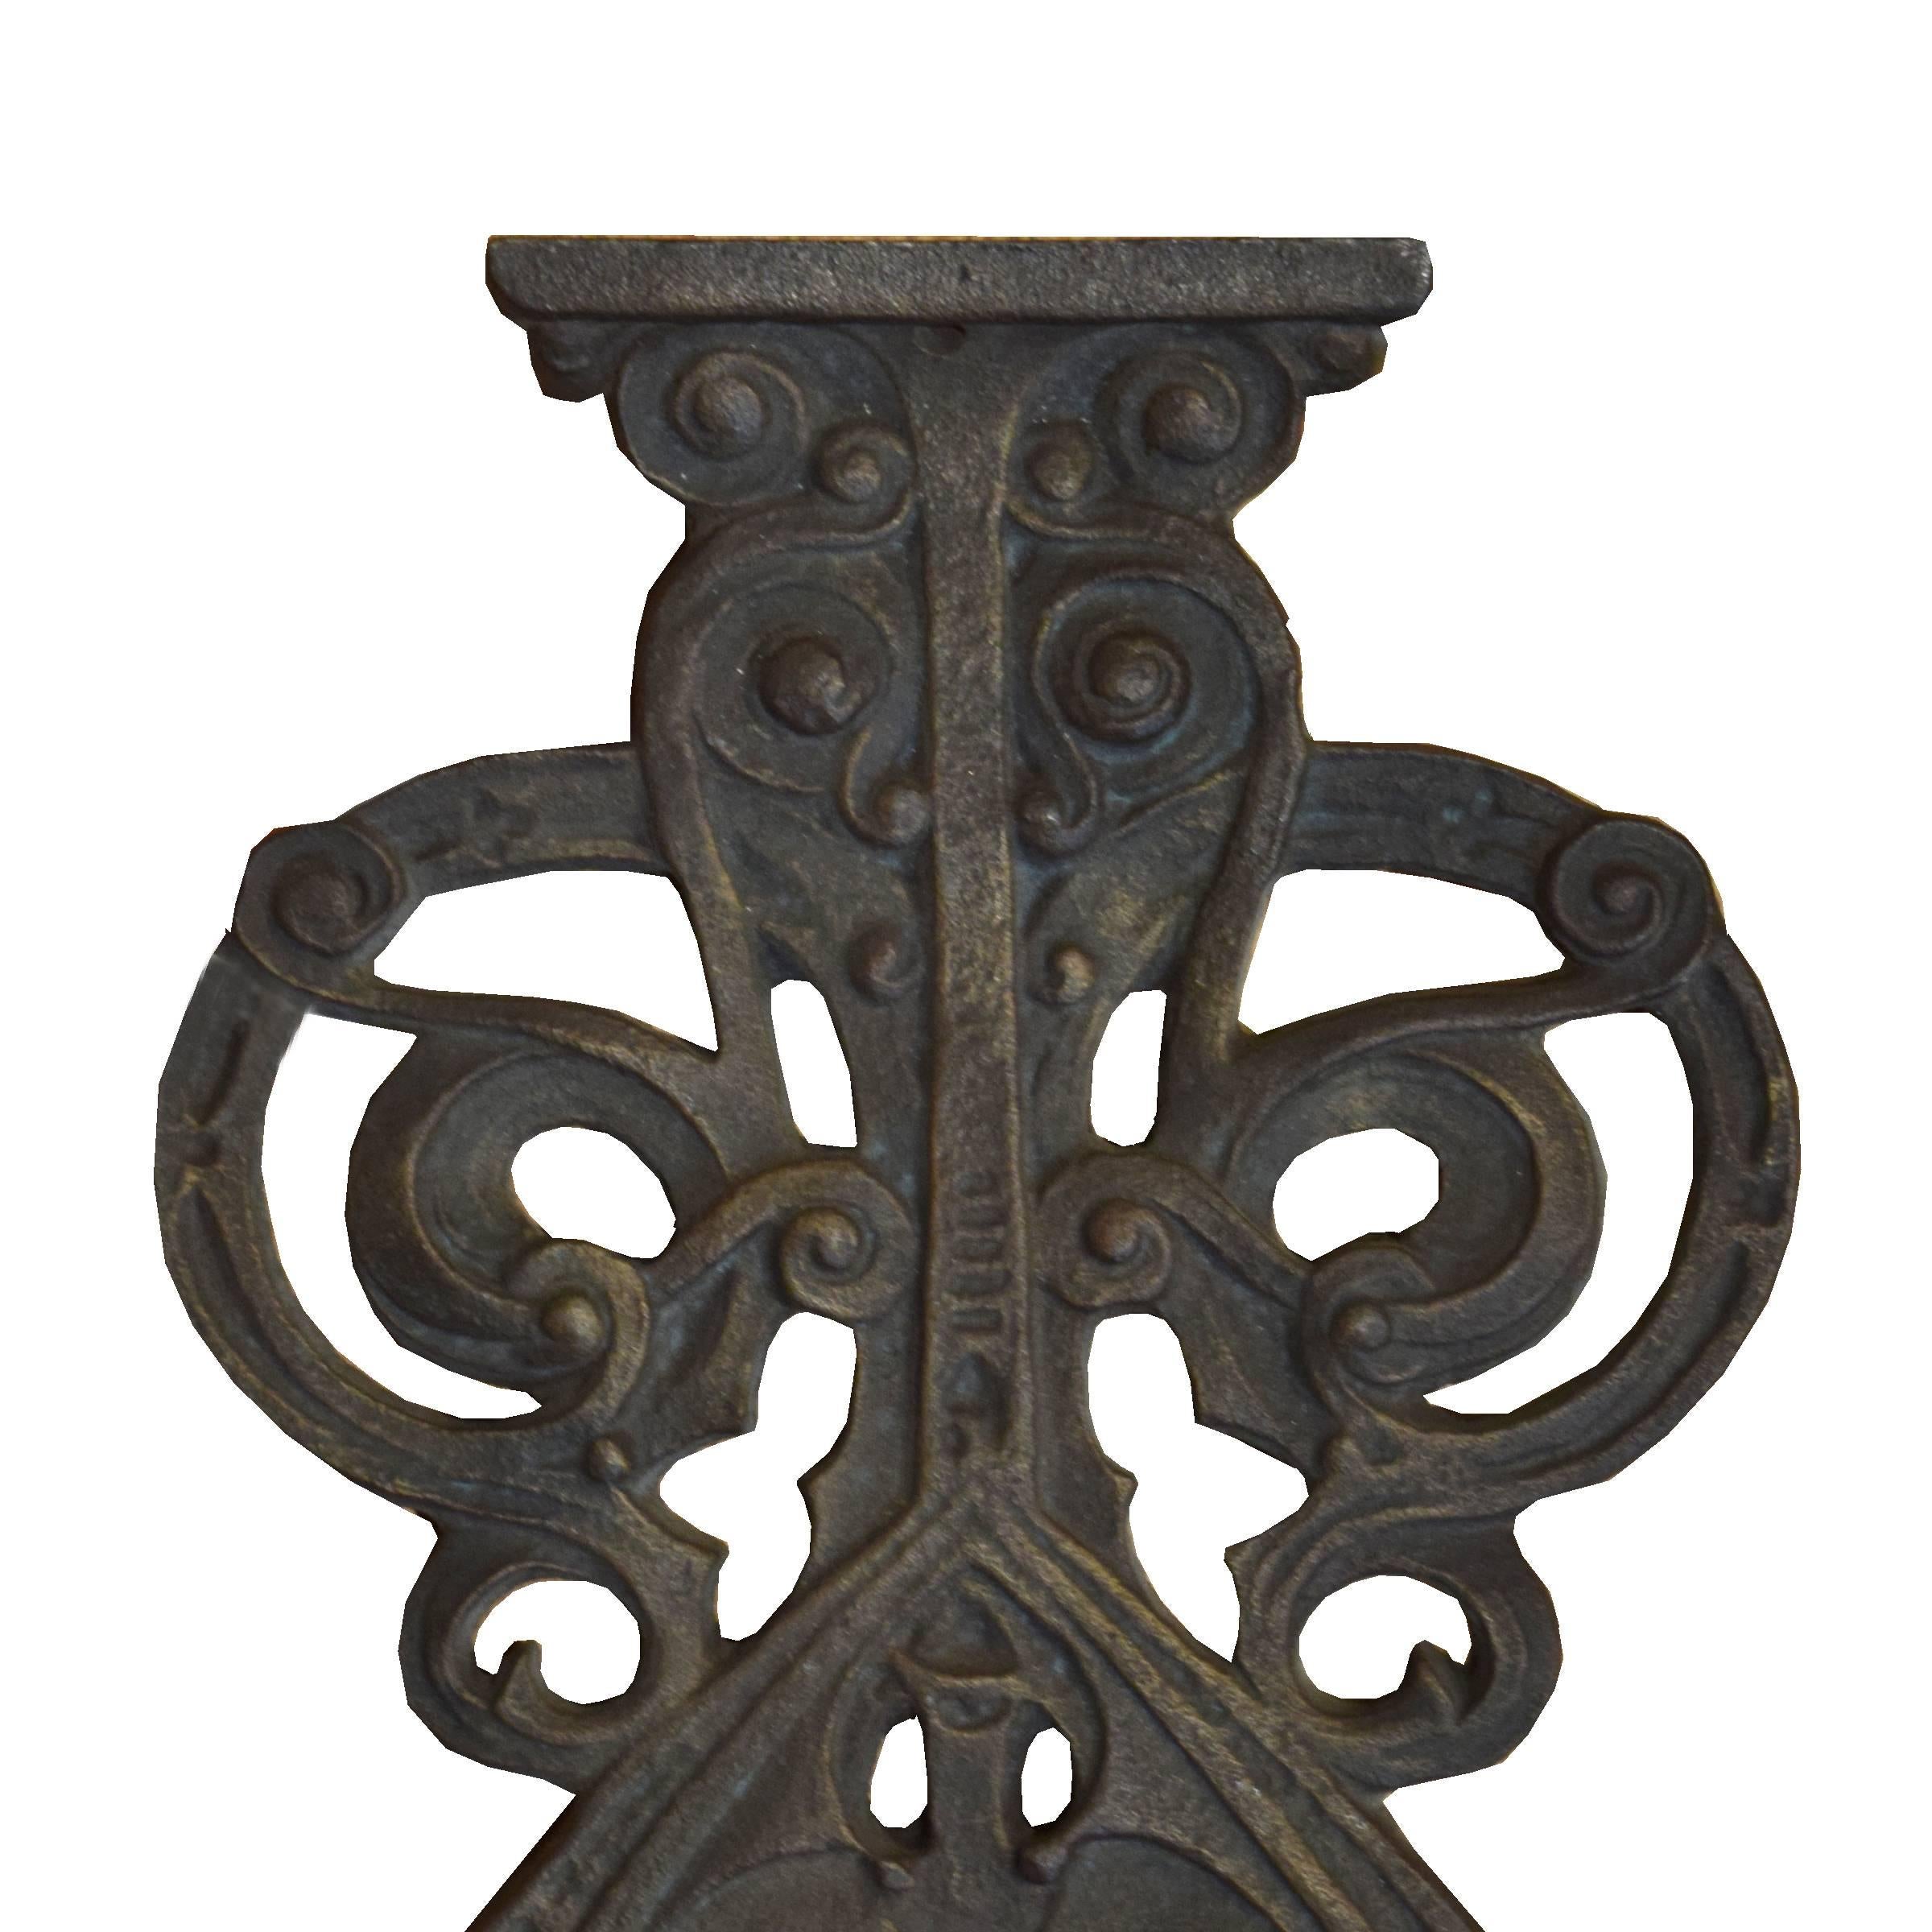 A Louis Sullivan designed cast iron stairway baluster from the Guaranty Building, buffalo, New York, 1894, designed by the legendary firm of Adler and Sullivan. Some of the original copper wash is still present.